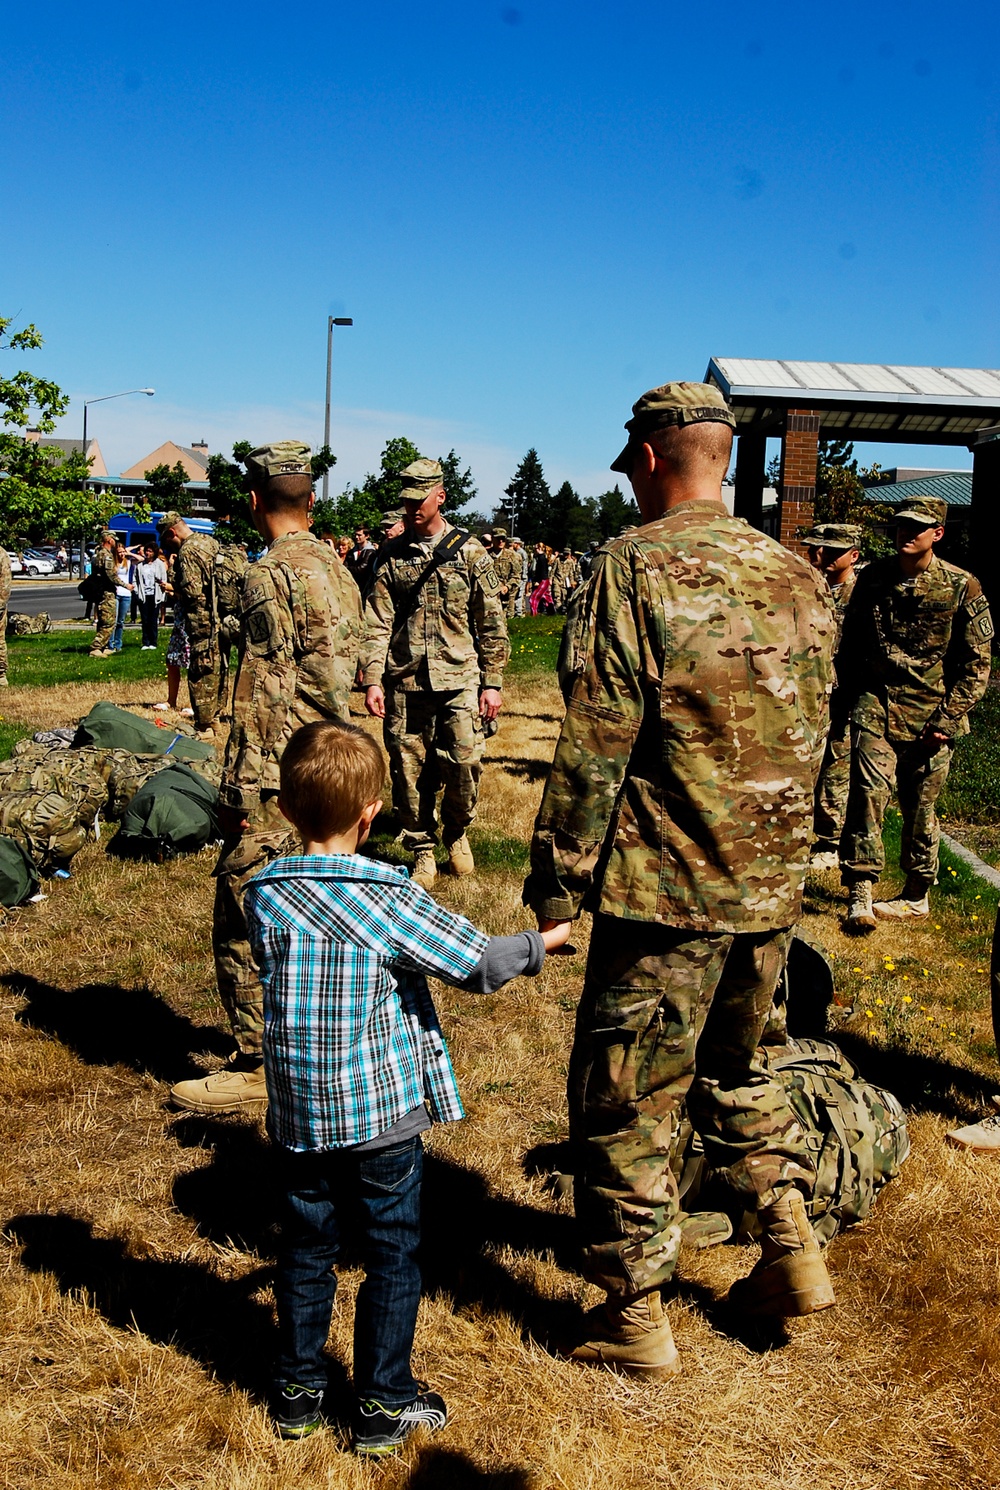 1-377 Field Artillery Battalion Soldiers Welcomed Home